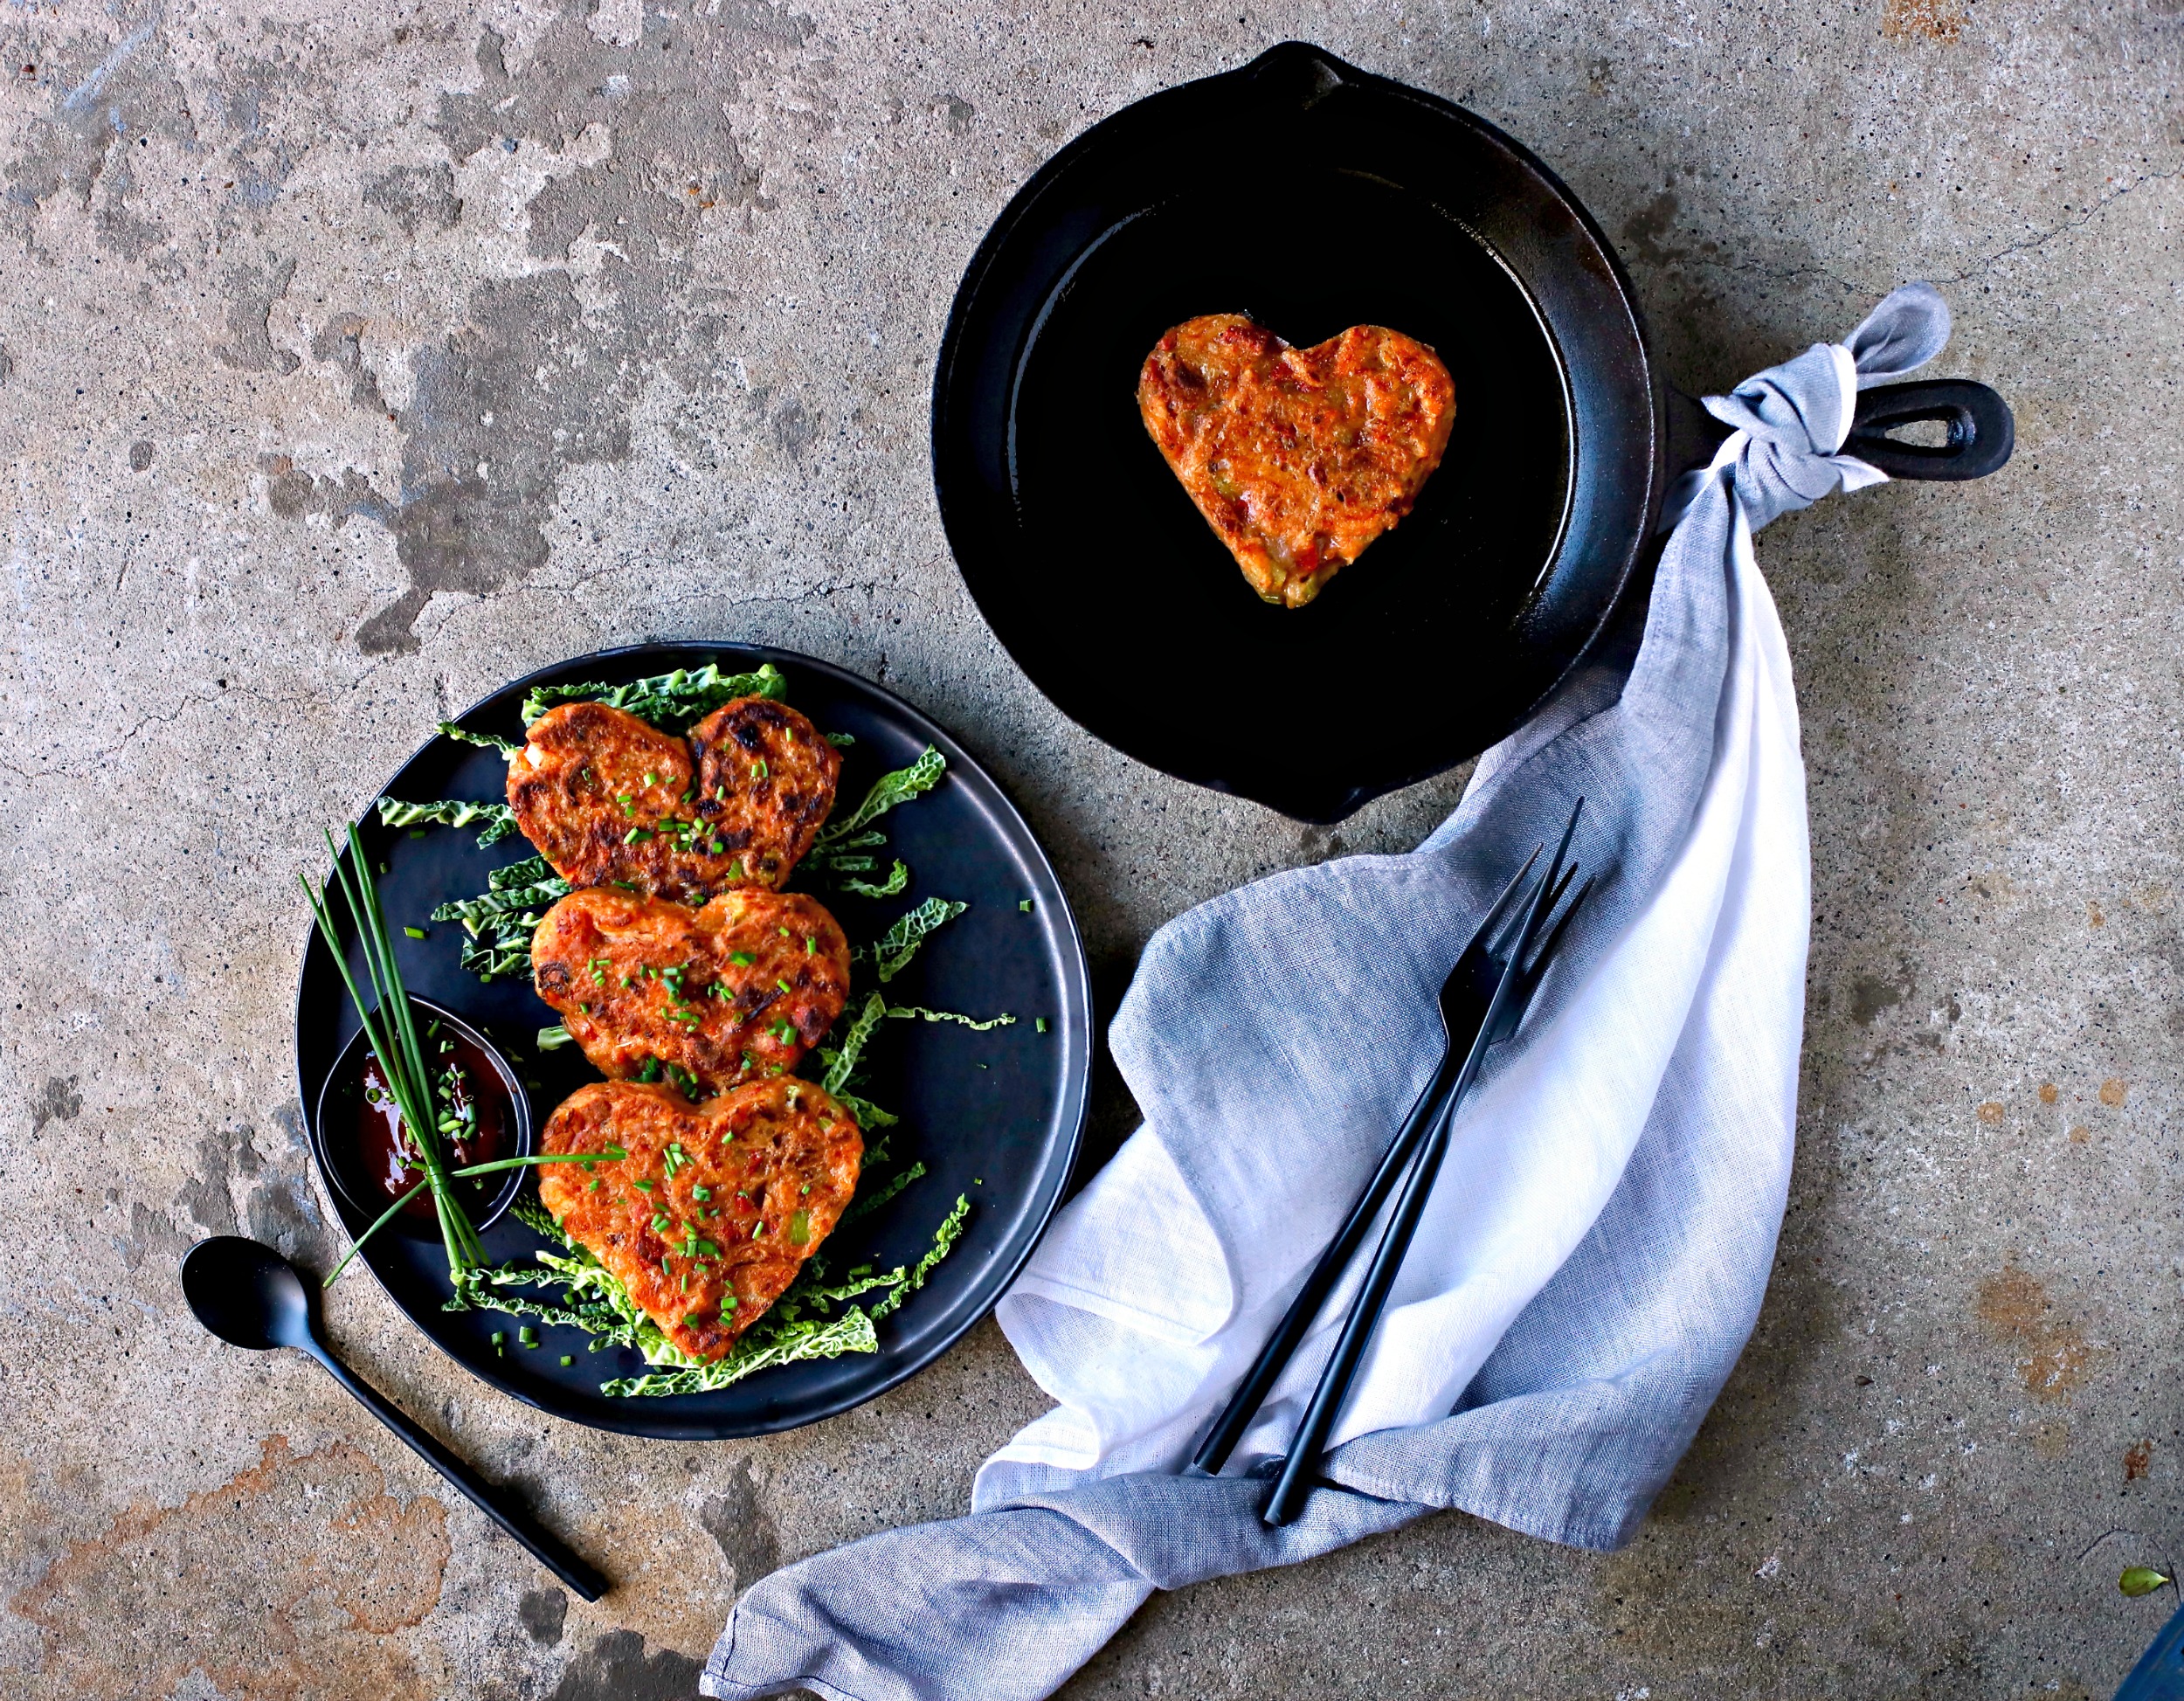 Smoked paprika and vegan chorizo turn these kimchi pancakes into a craveable appetizer, lunch or light supper. Perfect for Valentine's Day and Pancake Day, too.